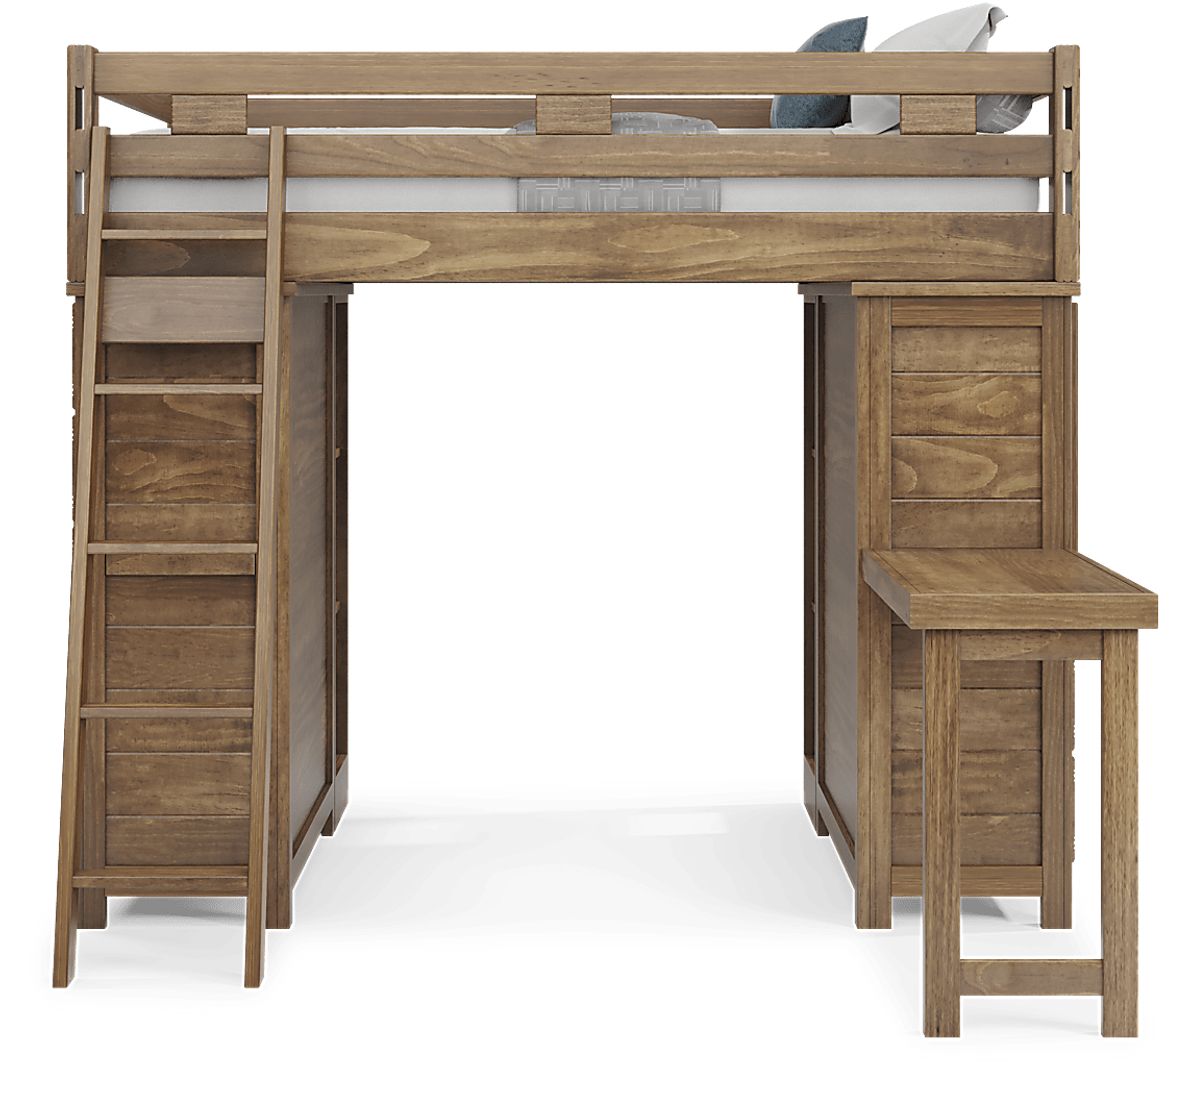 Kids Creekside 2.0 Chestnut Full Loft with 2 Loft Chests, 2 Bookcases and Desk Attachment